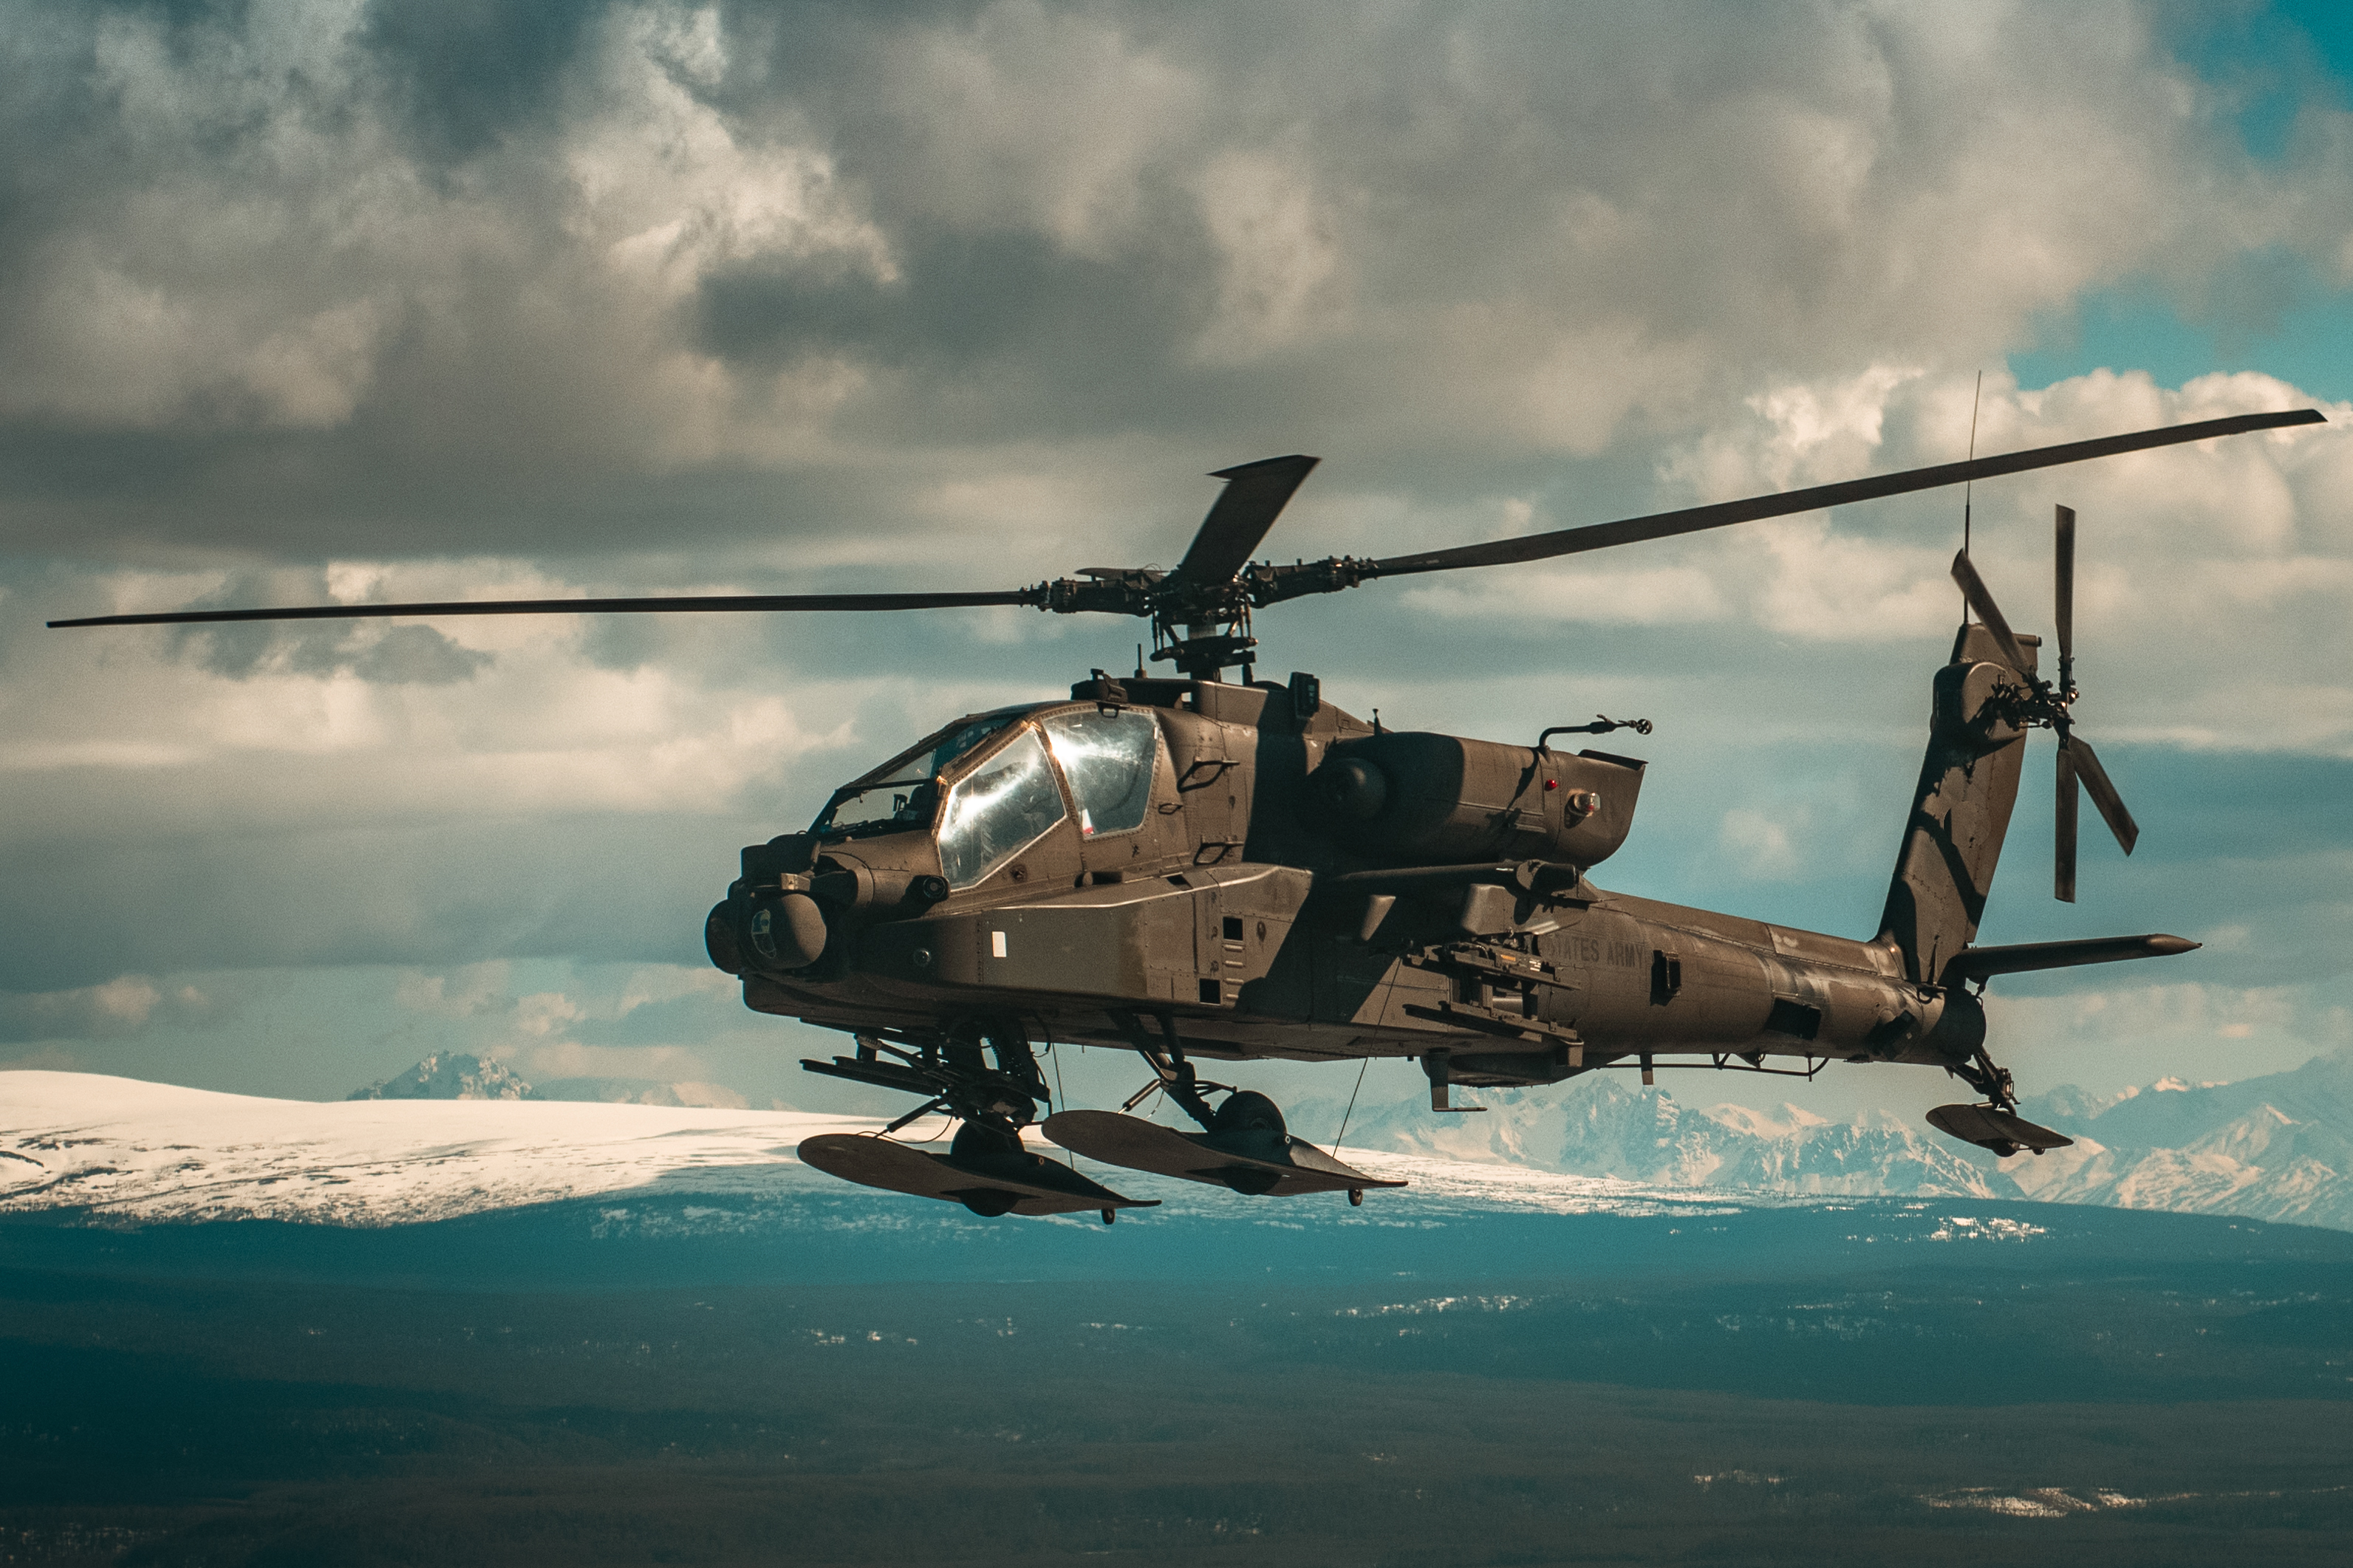 DVIDS - Images - Apache in Flight [Image 5 of 17]